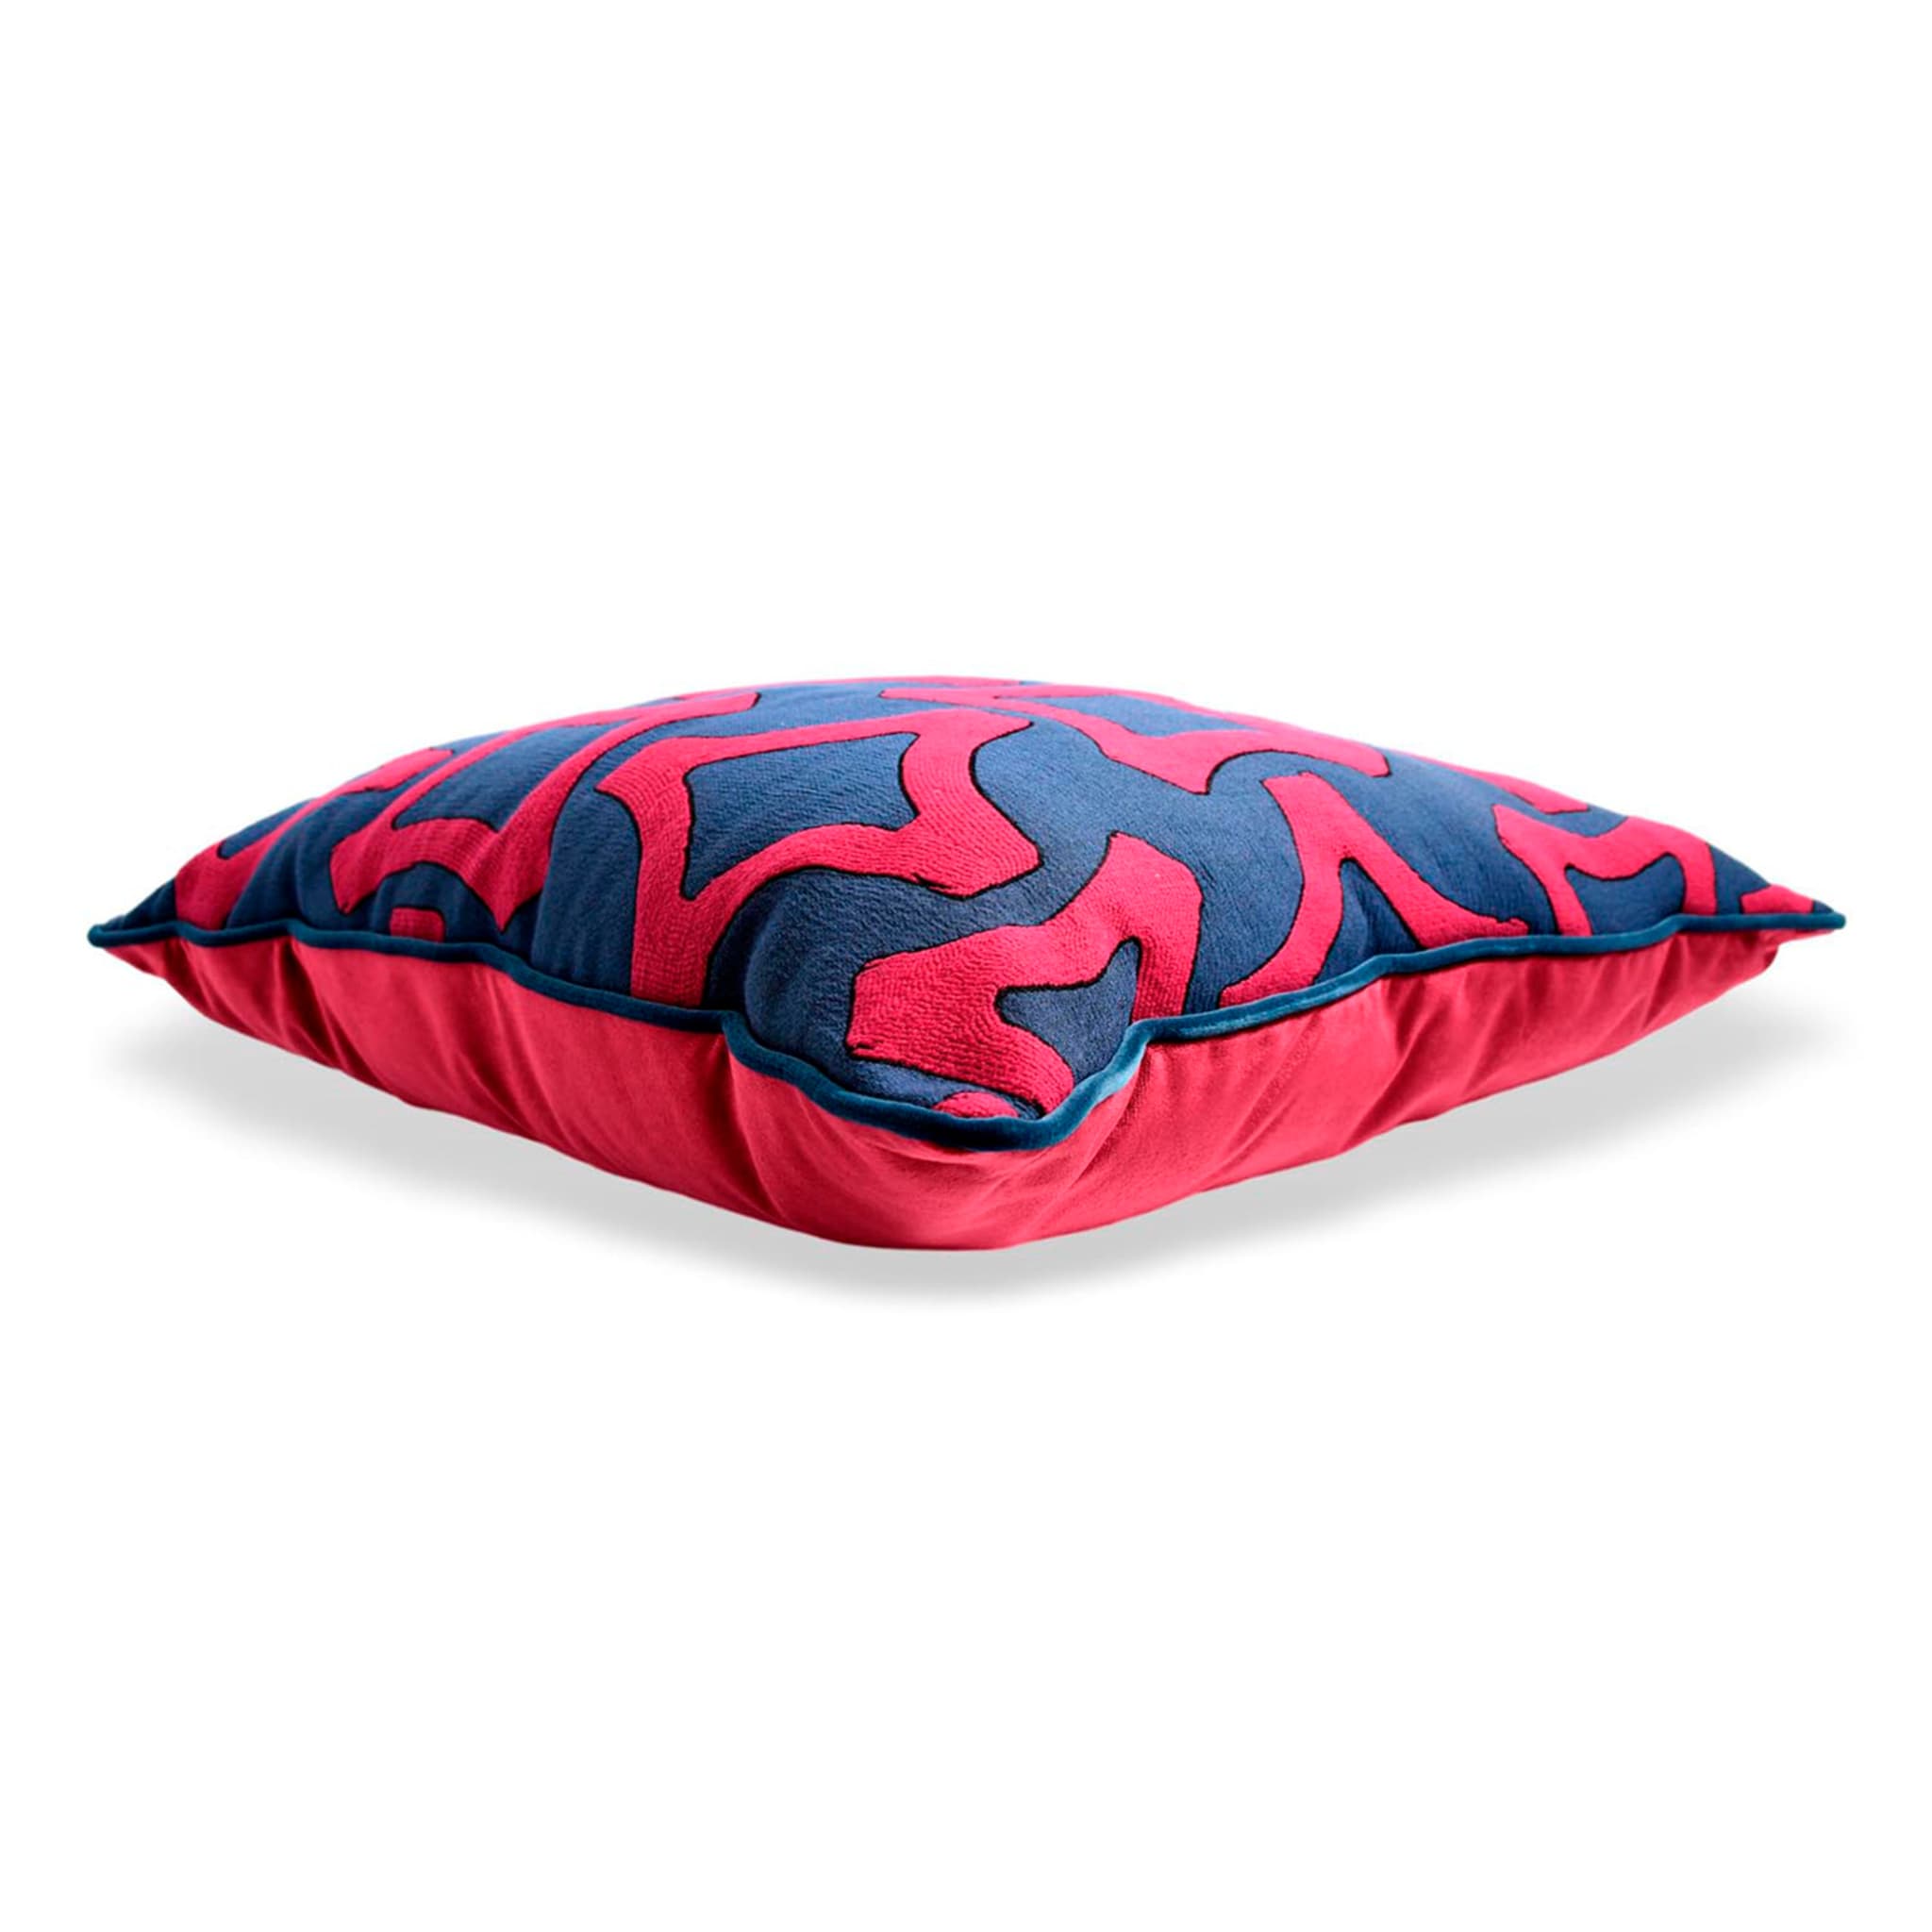 Carrè Large Patterned Blue and Fuchsia Square Cushion - Alternative view 2